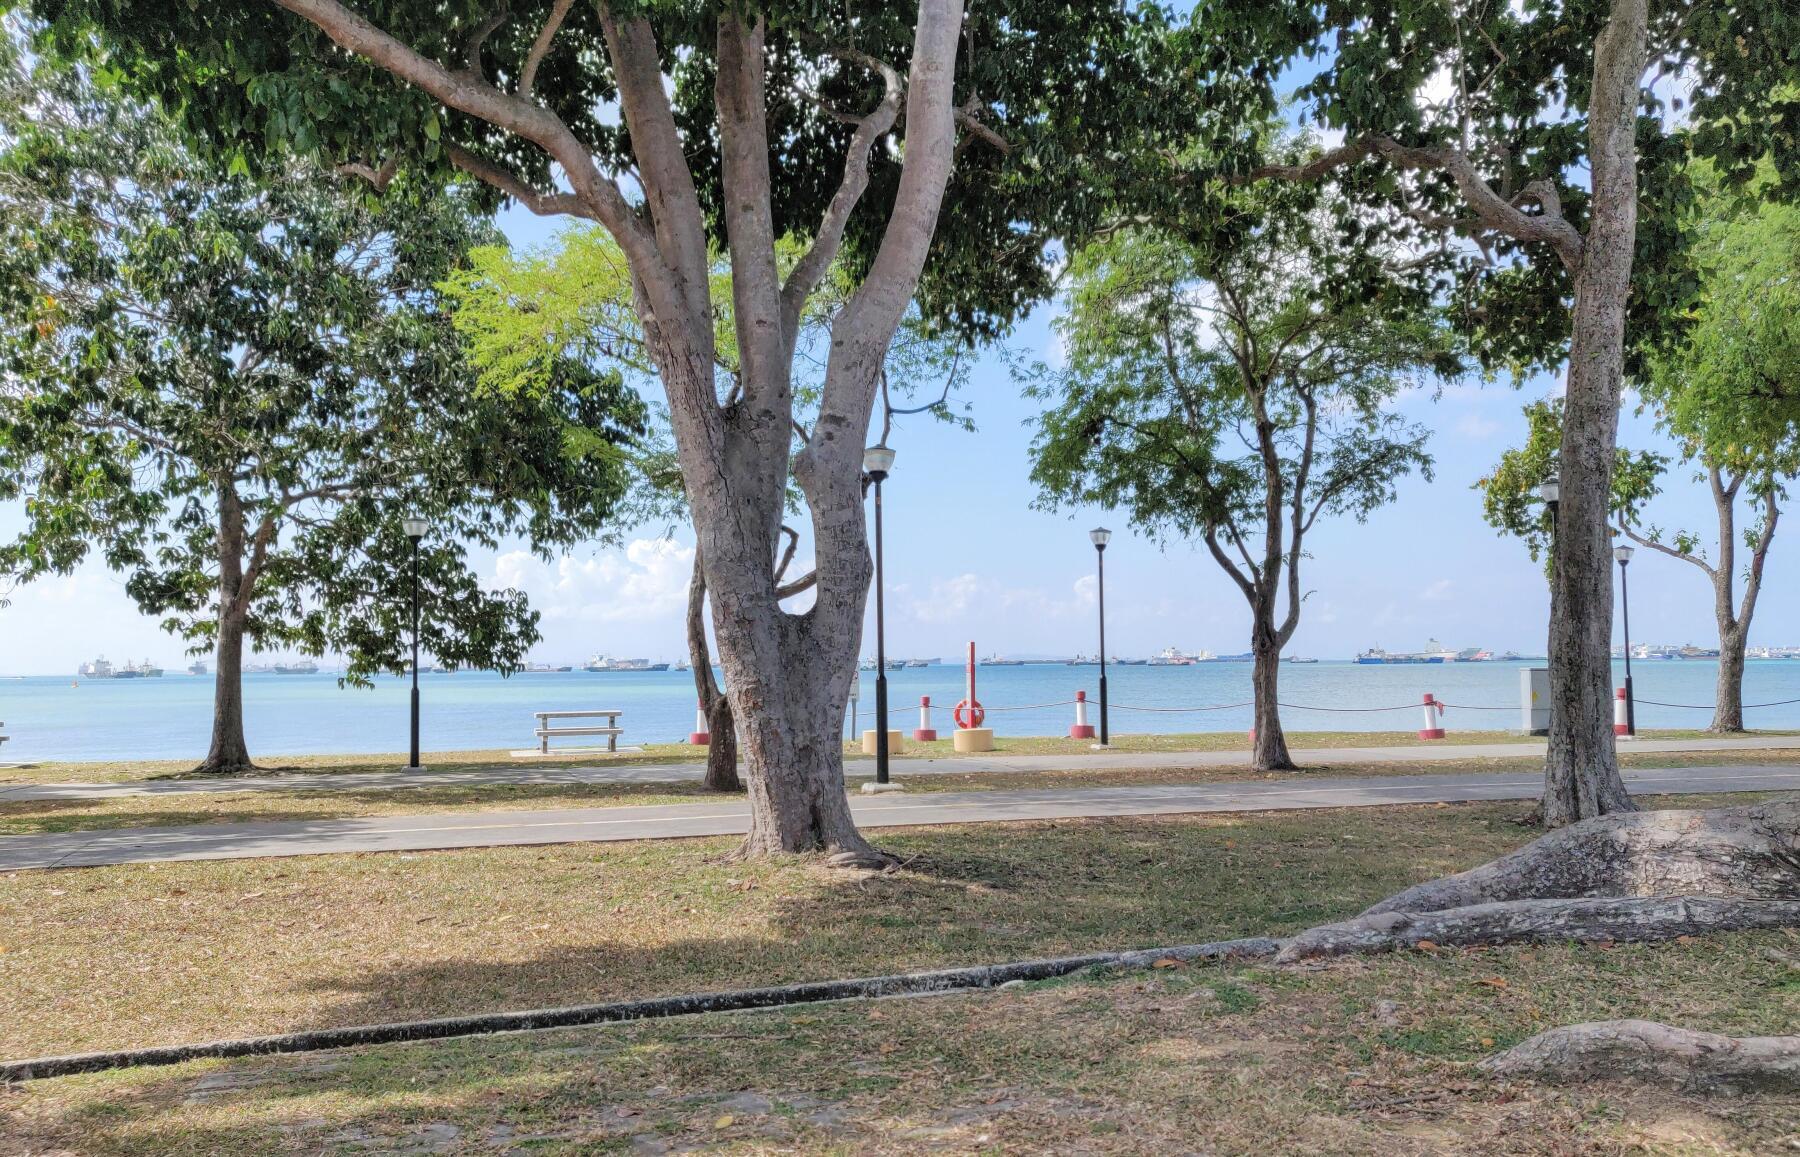 Scenic Cycling Routes in Singapore Part 1: East Coast Park